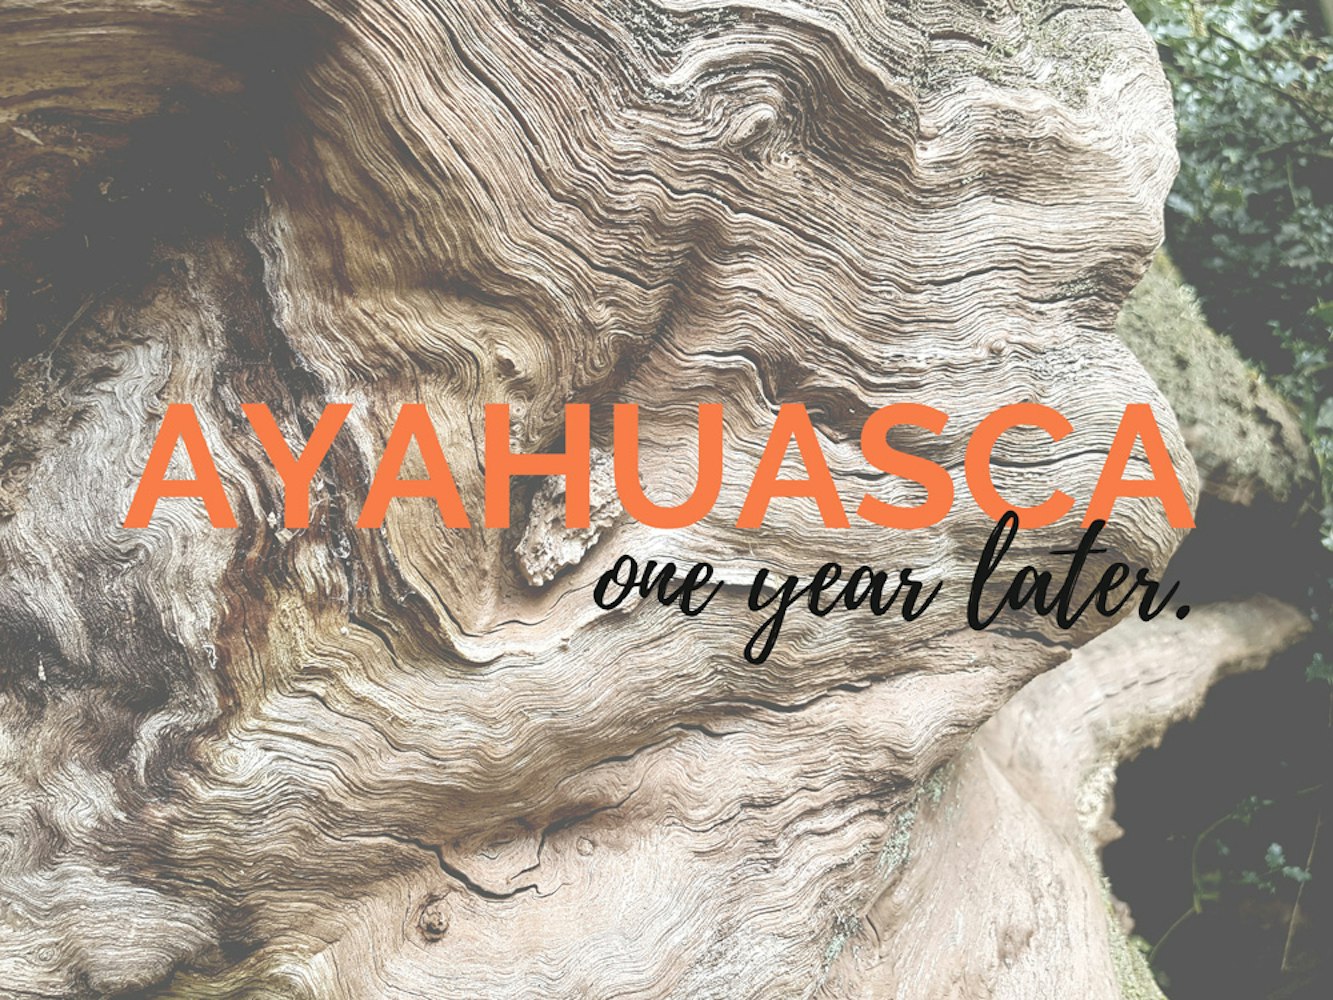 Cover Image for Ayahuasca – A reflection, one year later 